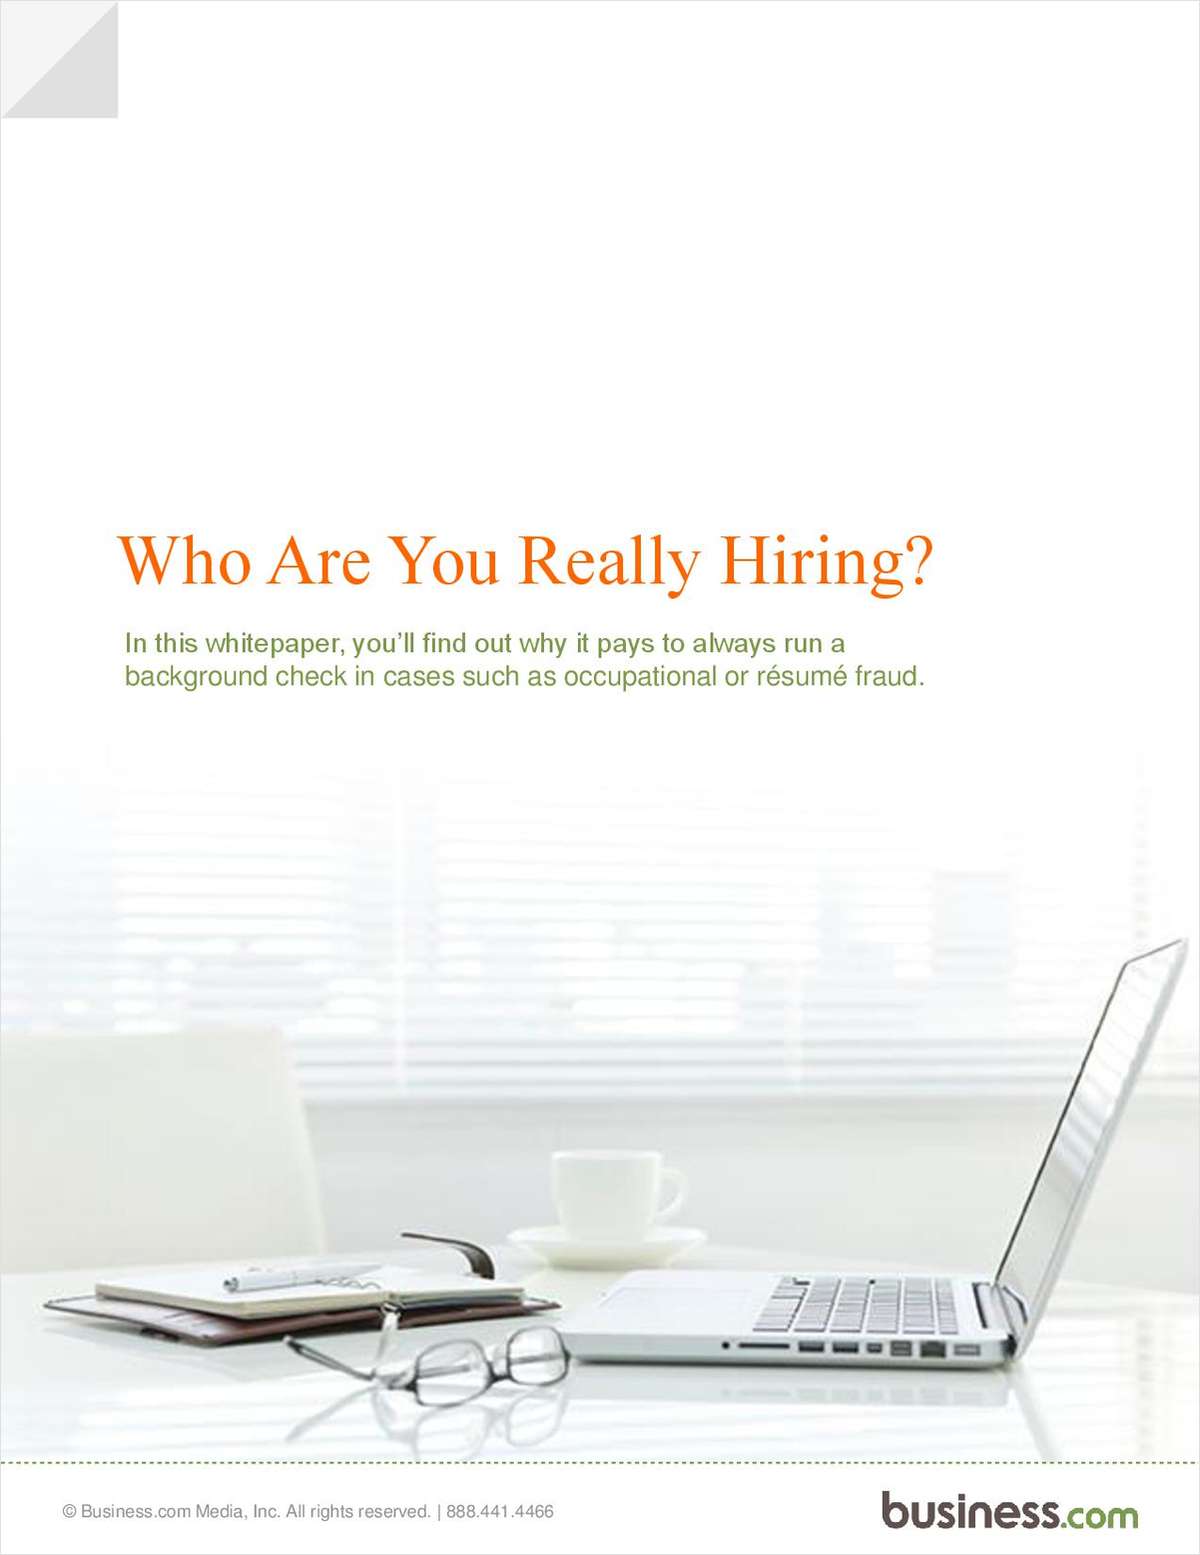 Background Checks:  Understanding Who You Are Hiring